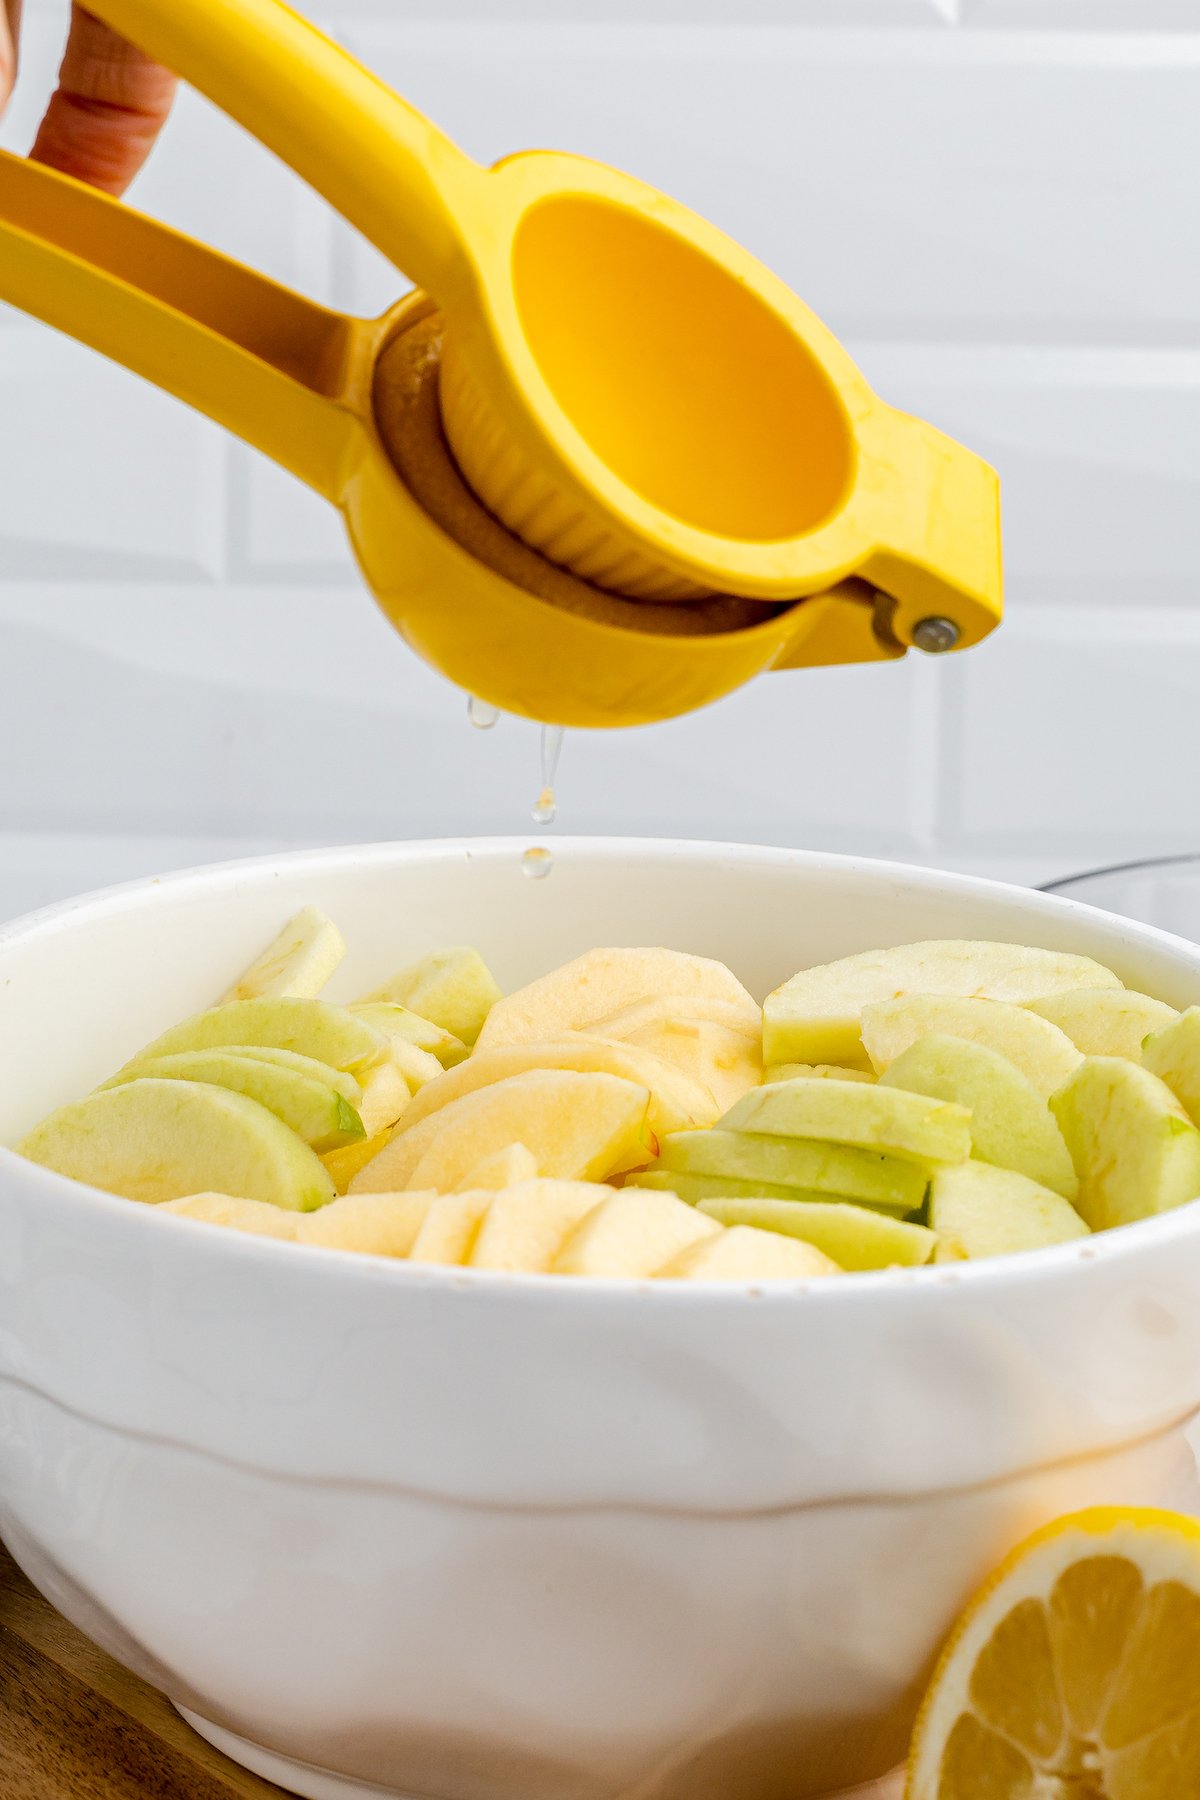 A lemon is squeezed overtop a bowl of apple slices.